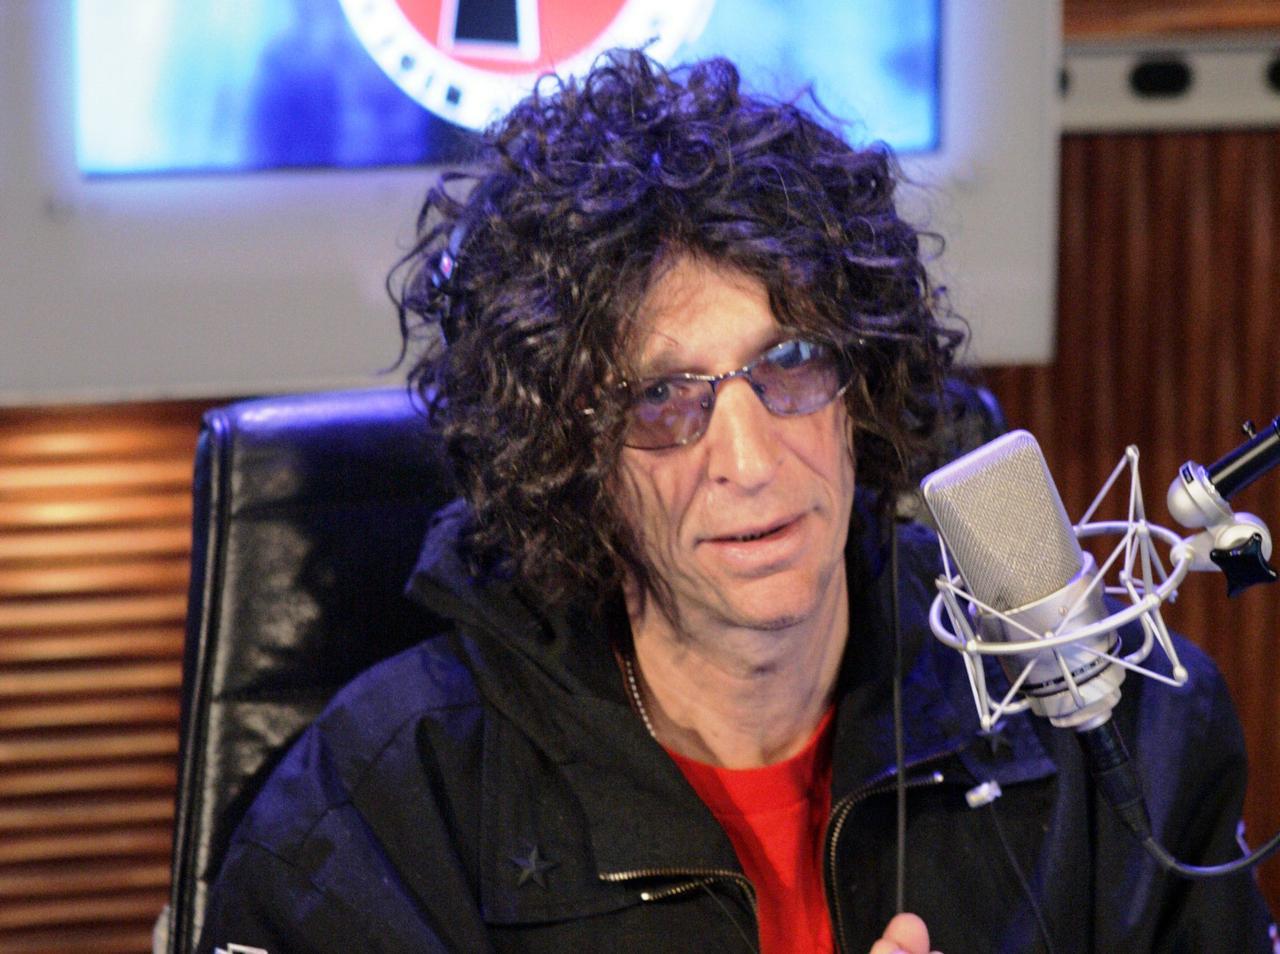 Happy Birthday to Howard Stern, who turns 61 today! 